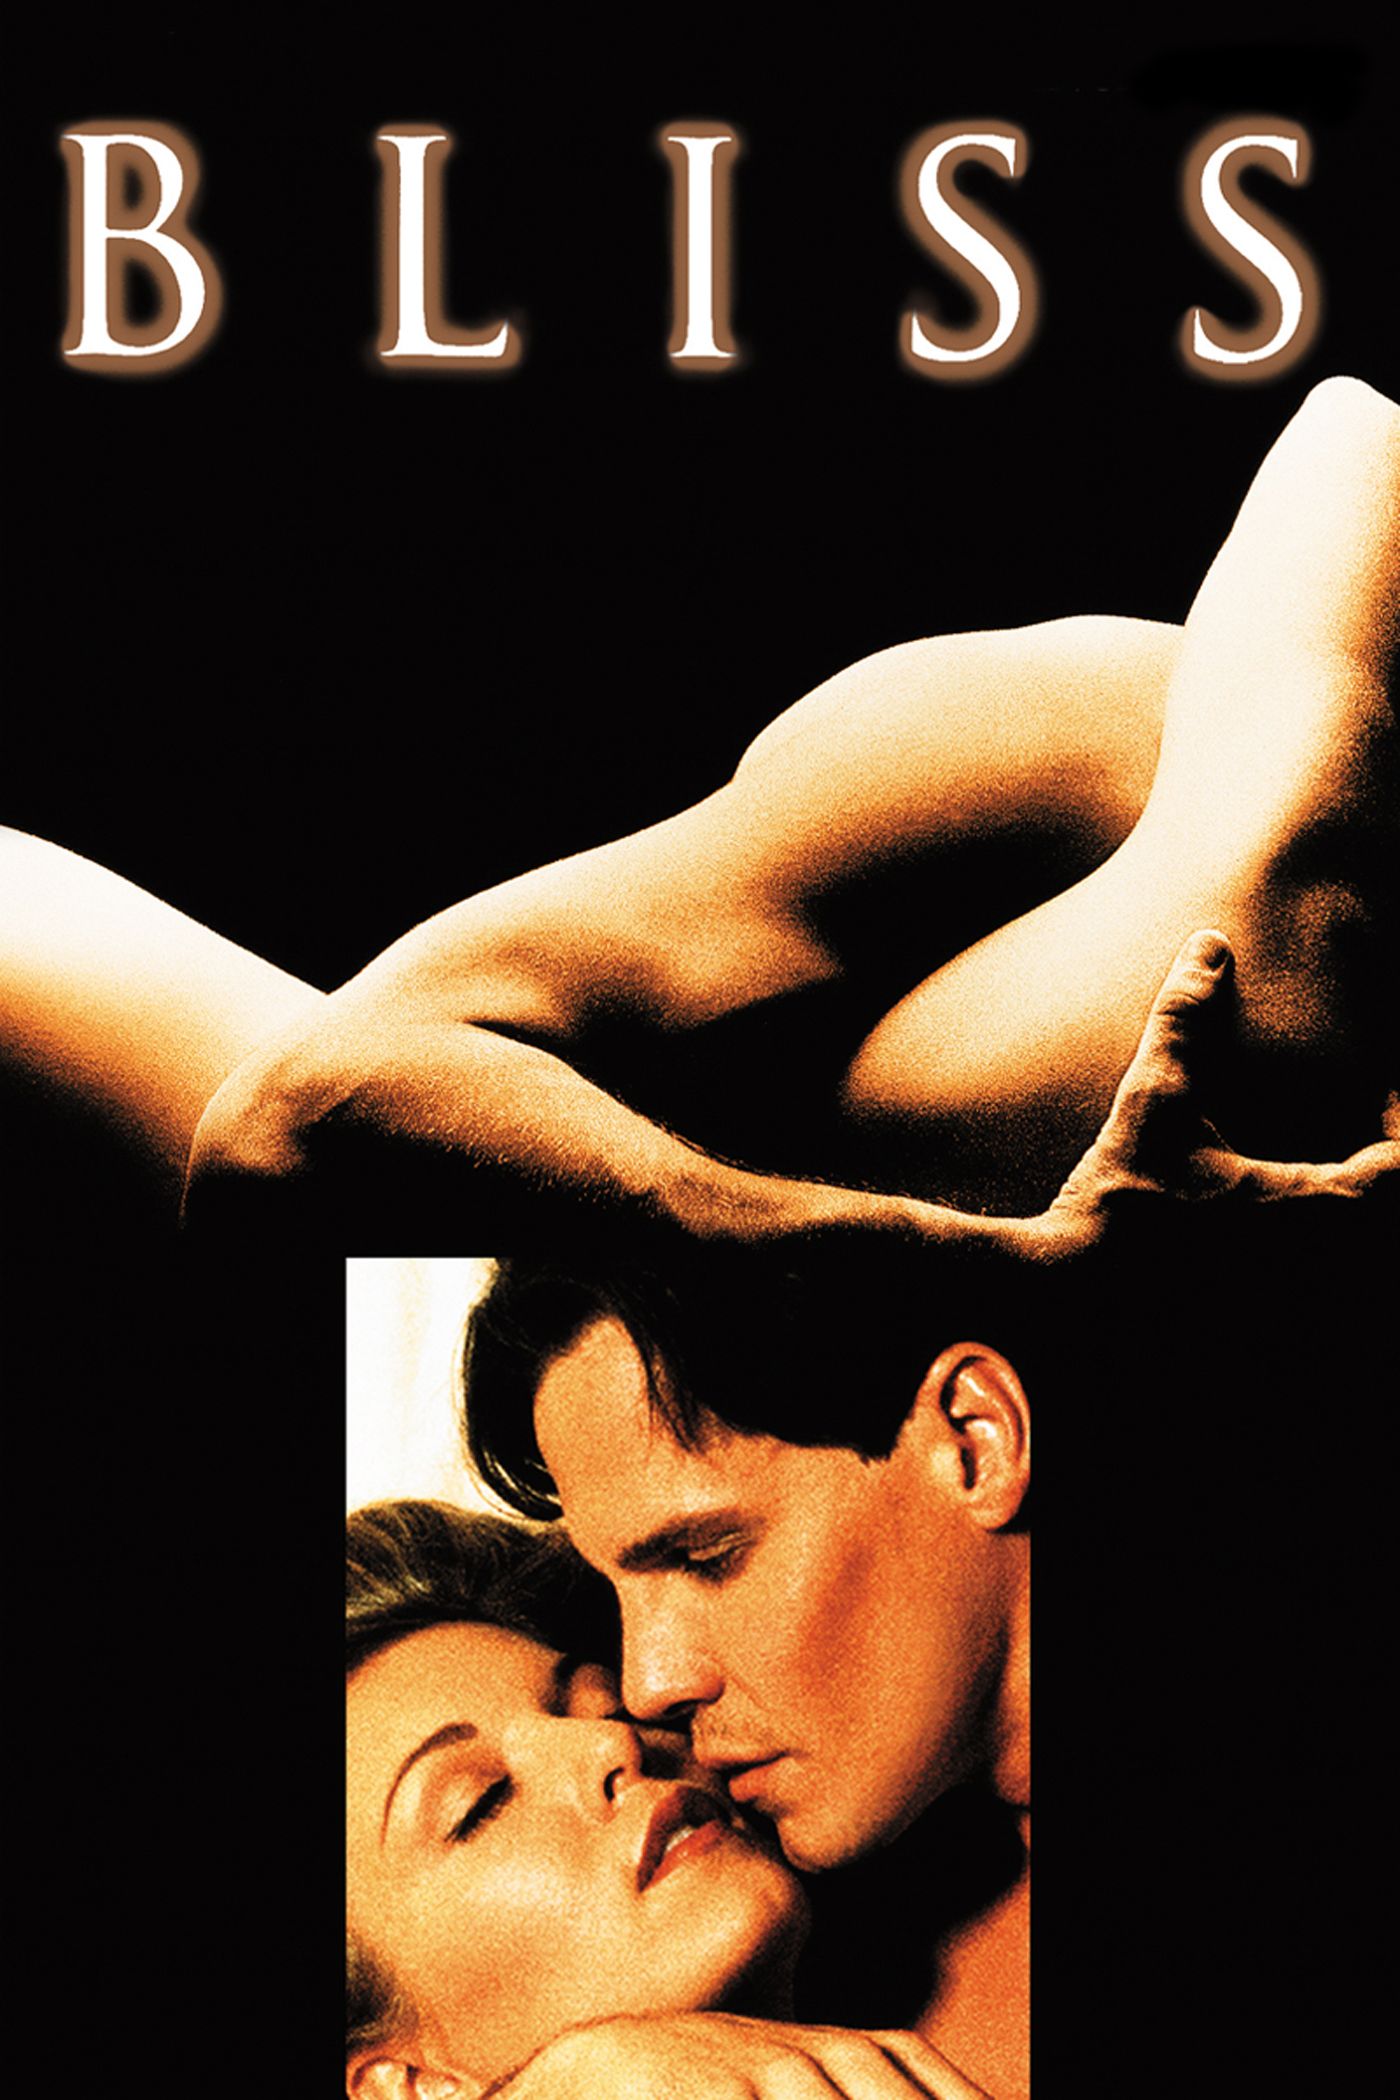 fifty shades of grey full movie online